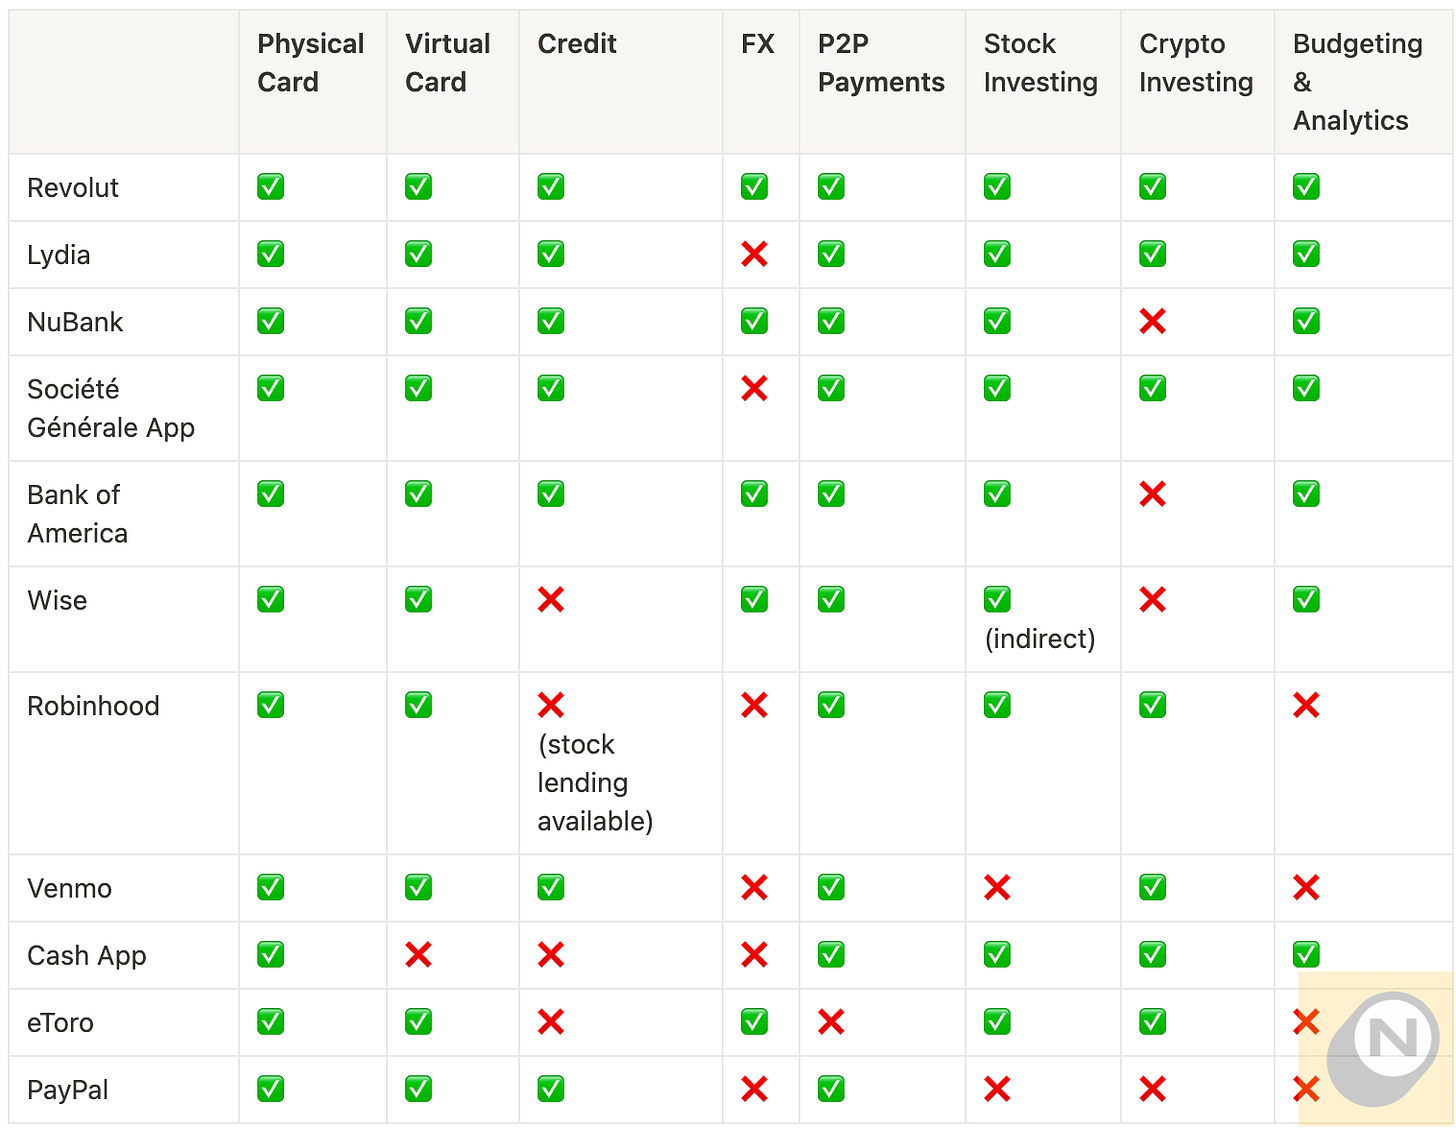 Table showing a list of the most popular fintech apps and their associated features, showing how they all share the same features.